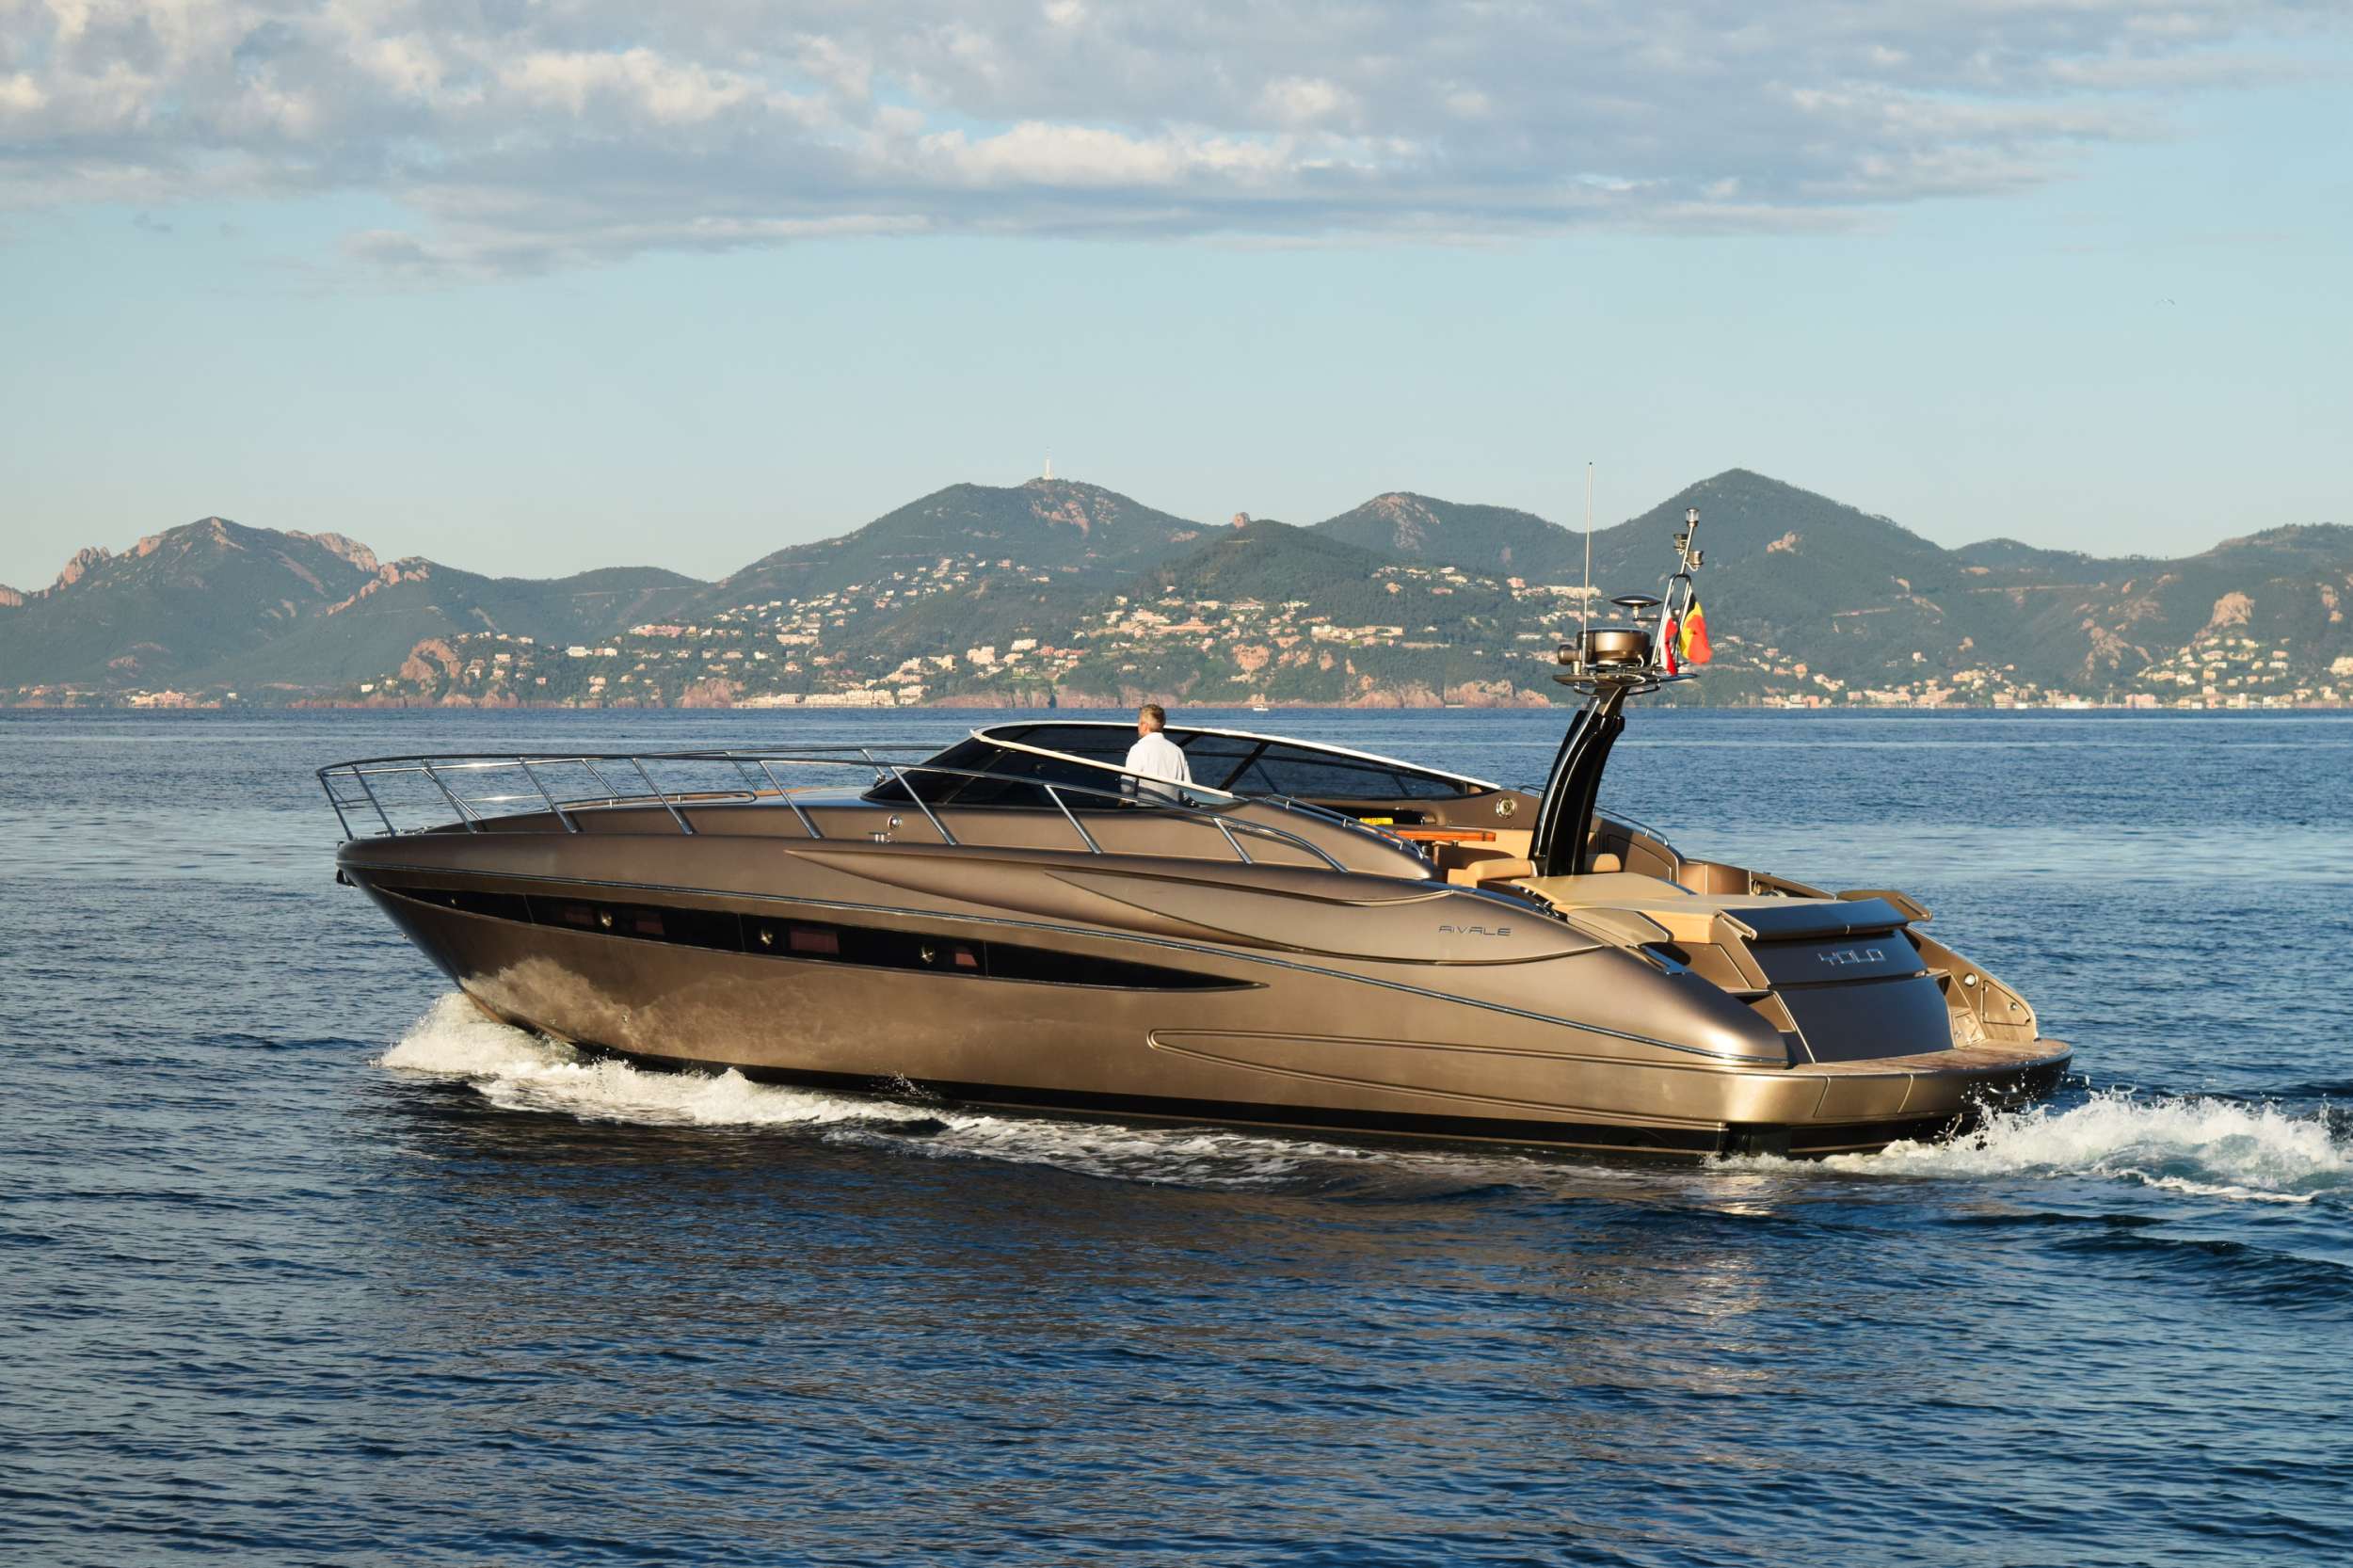 Yolo - Yacht Charter Antibes & Boat hire in Fr. Riviera, Corsica & Sardinia 1